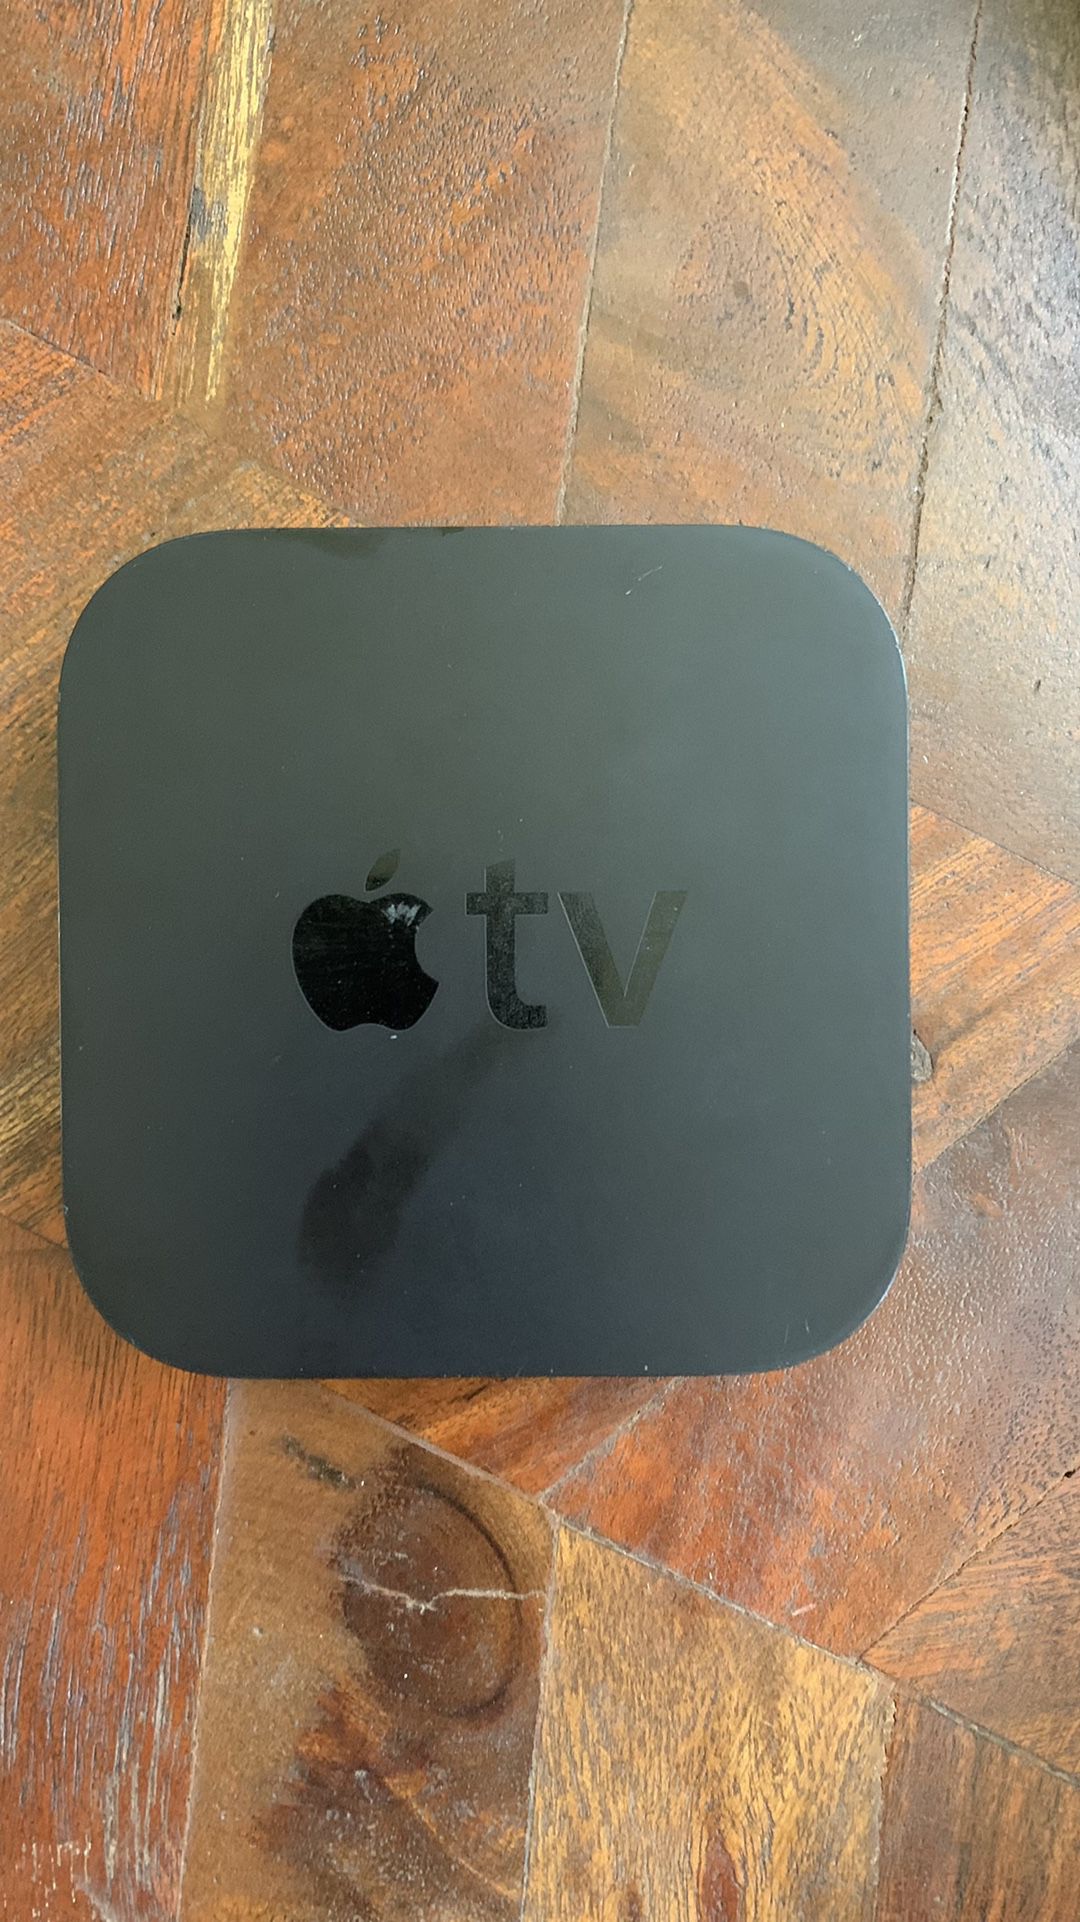 Apple TV A1427 (3rd Generation) with Remote